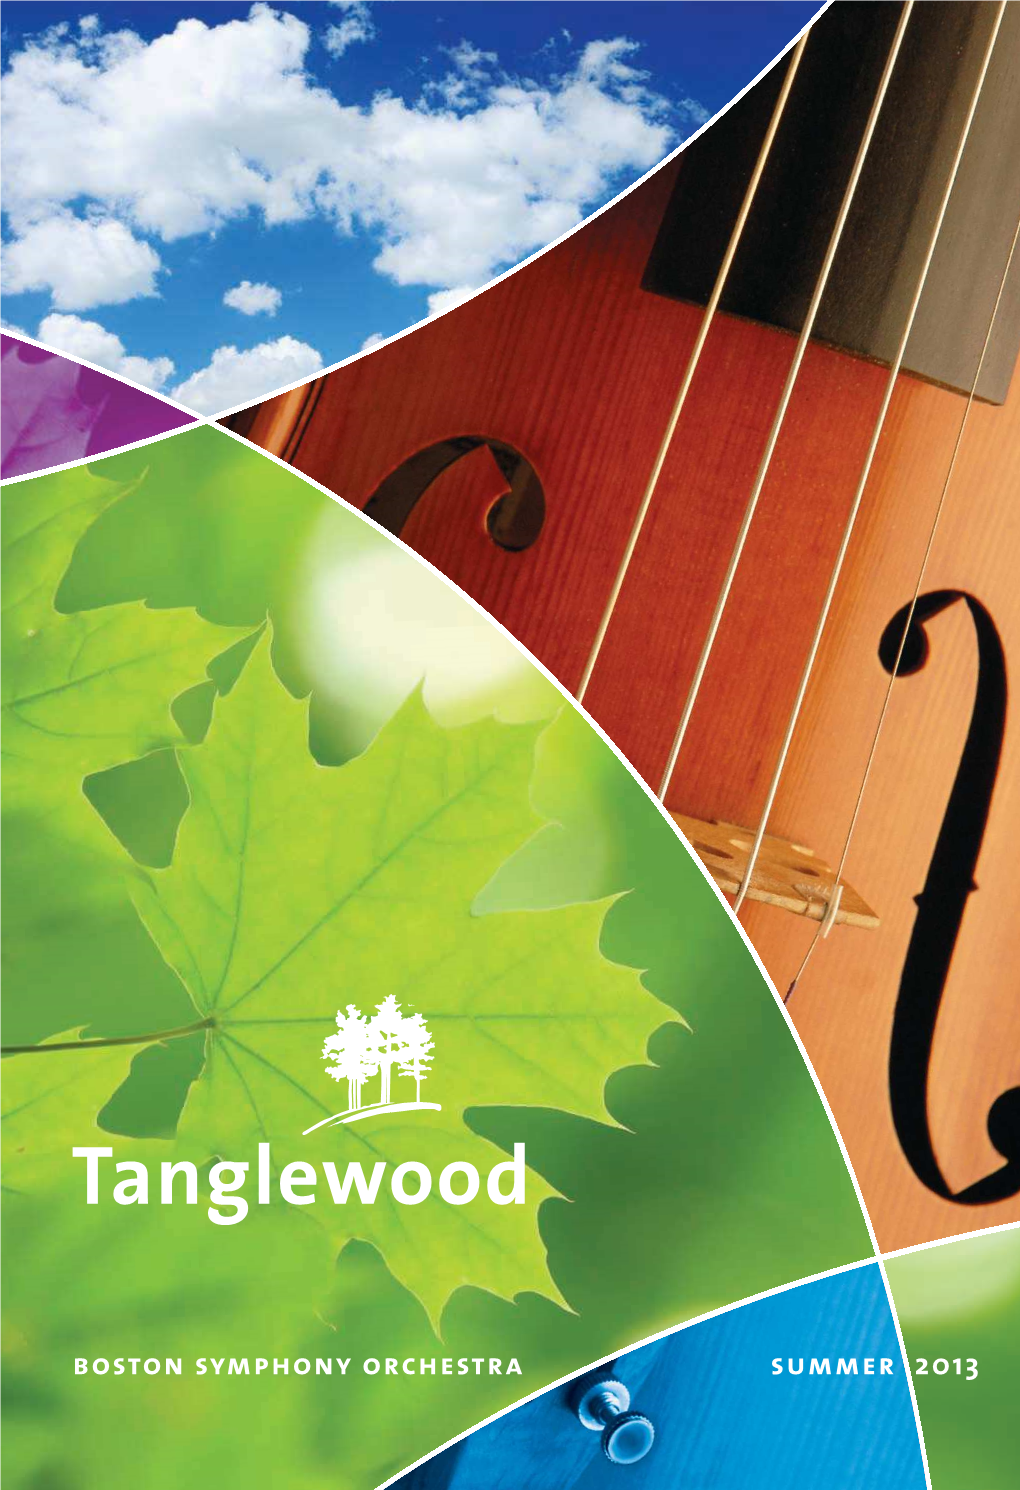 Tanglewood the Tanglewood Festival